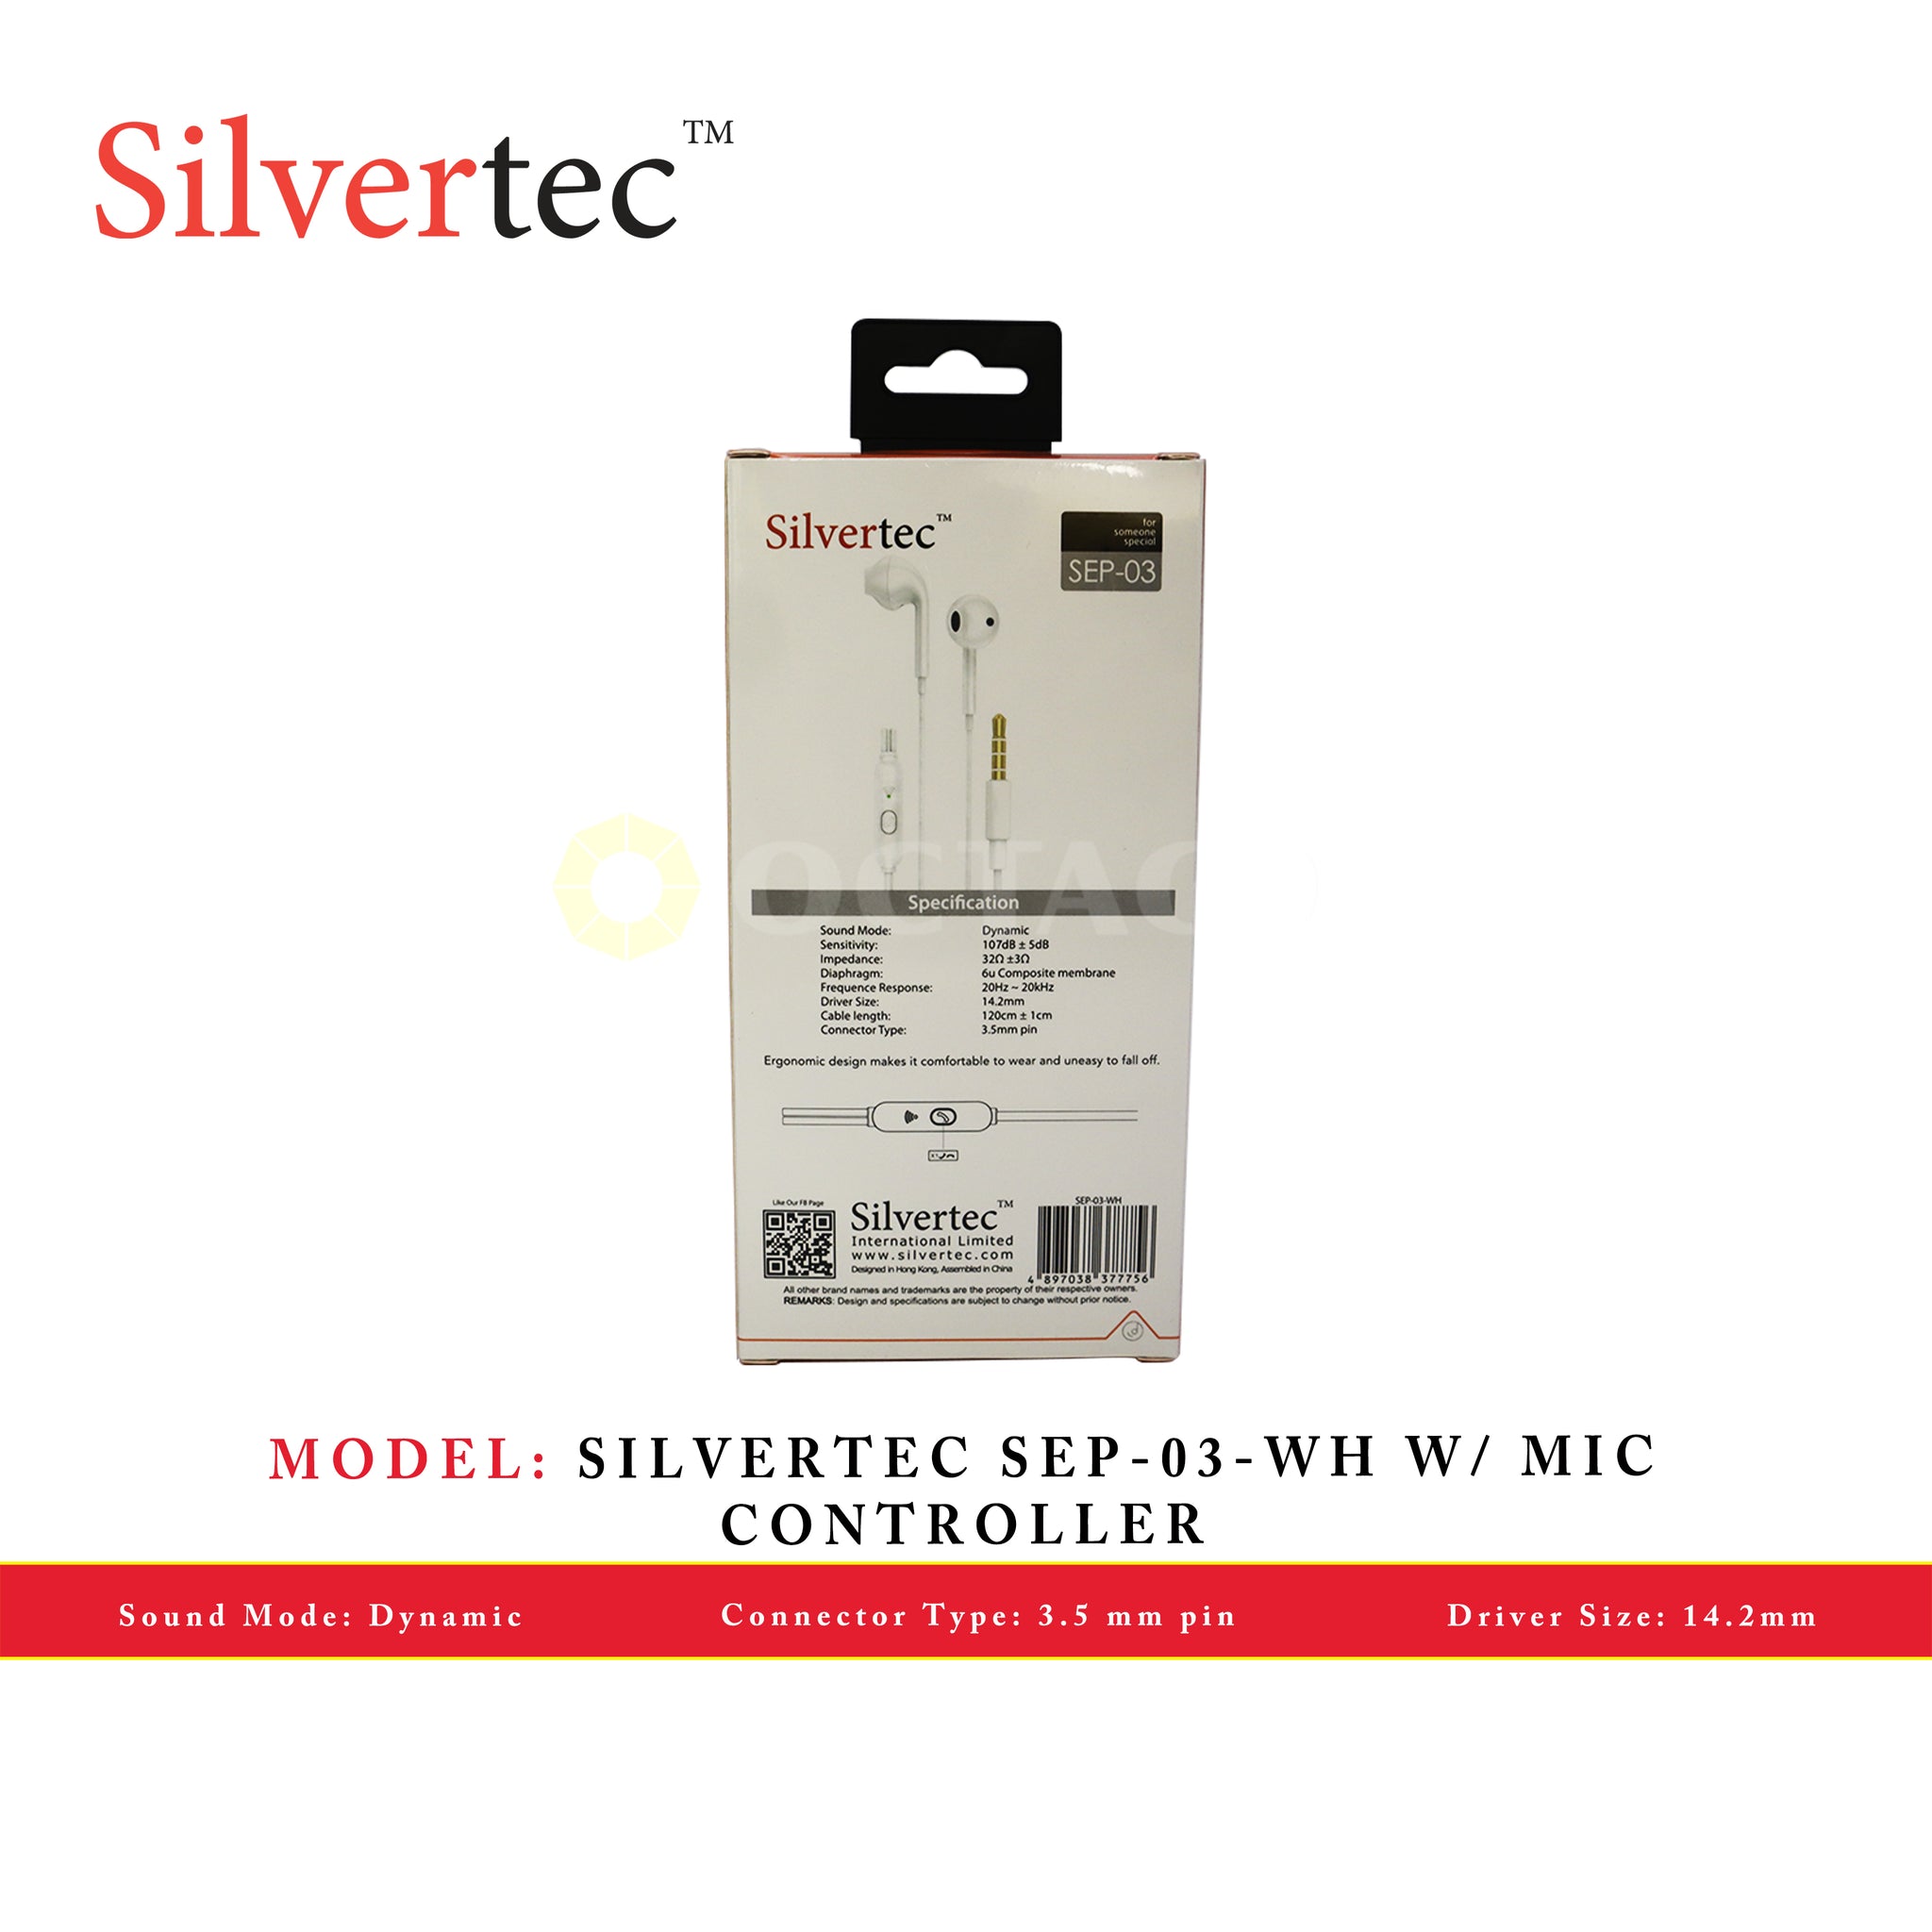 SILVERTEC SEP-03-WH W/ MIC CONTROLLER